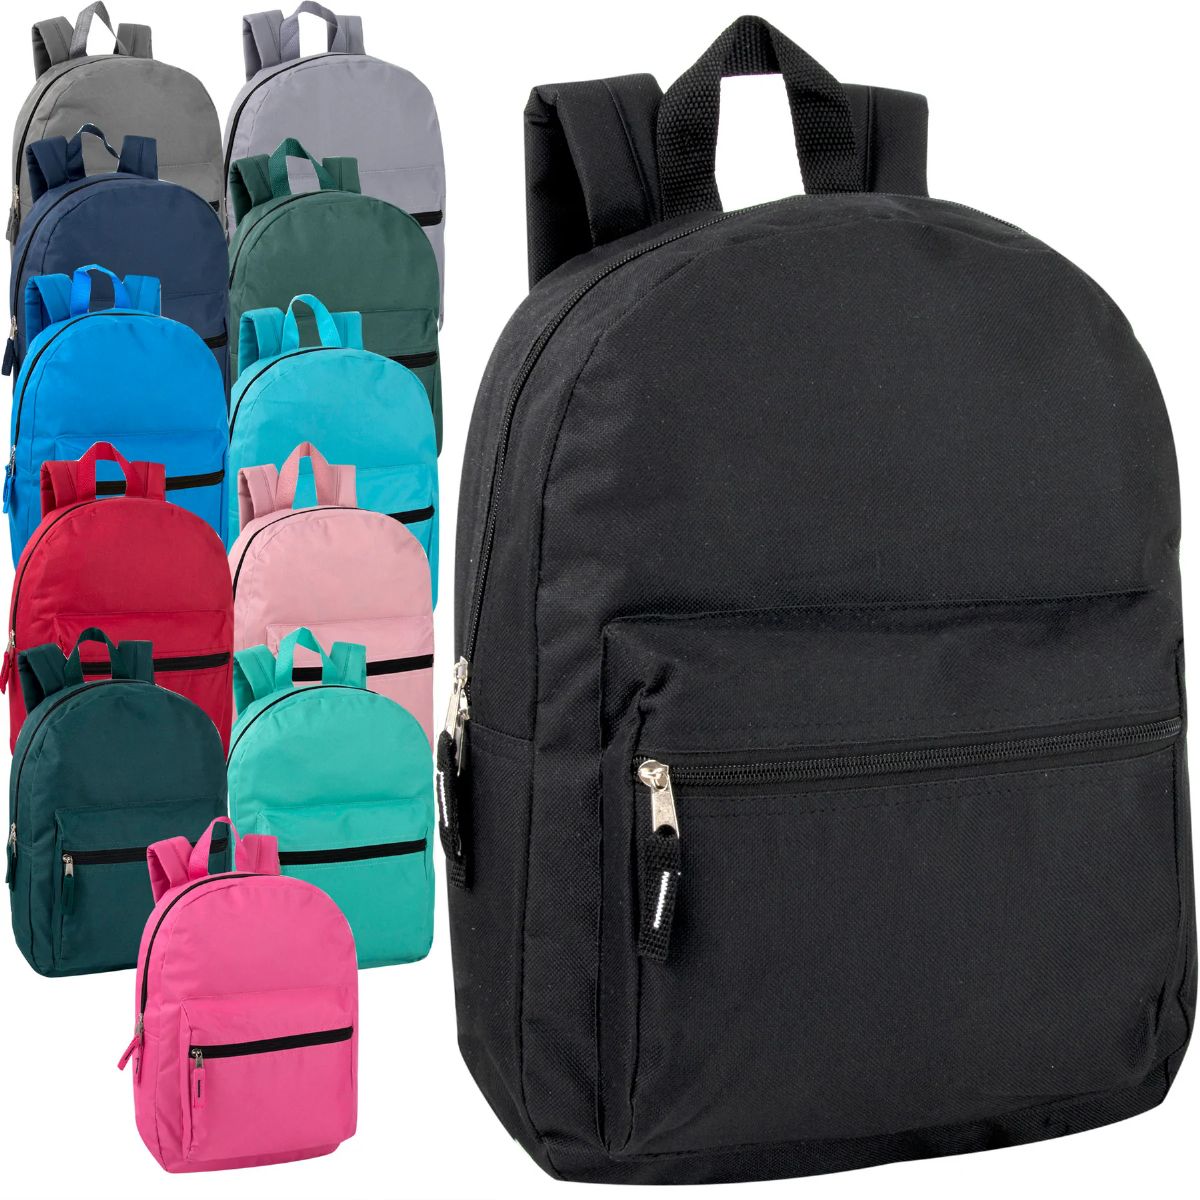 24 Pieces of 15 Inch Basic Backpack